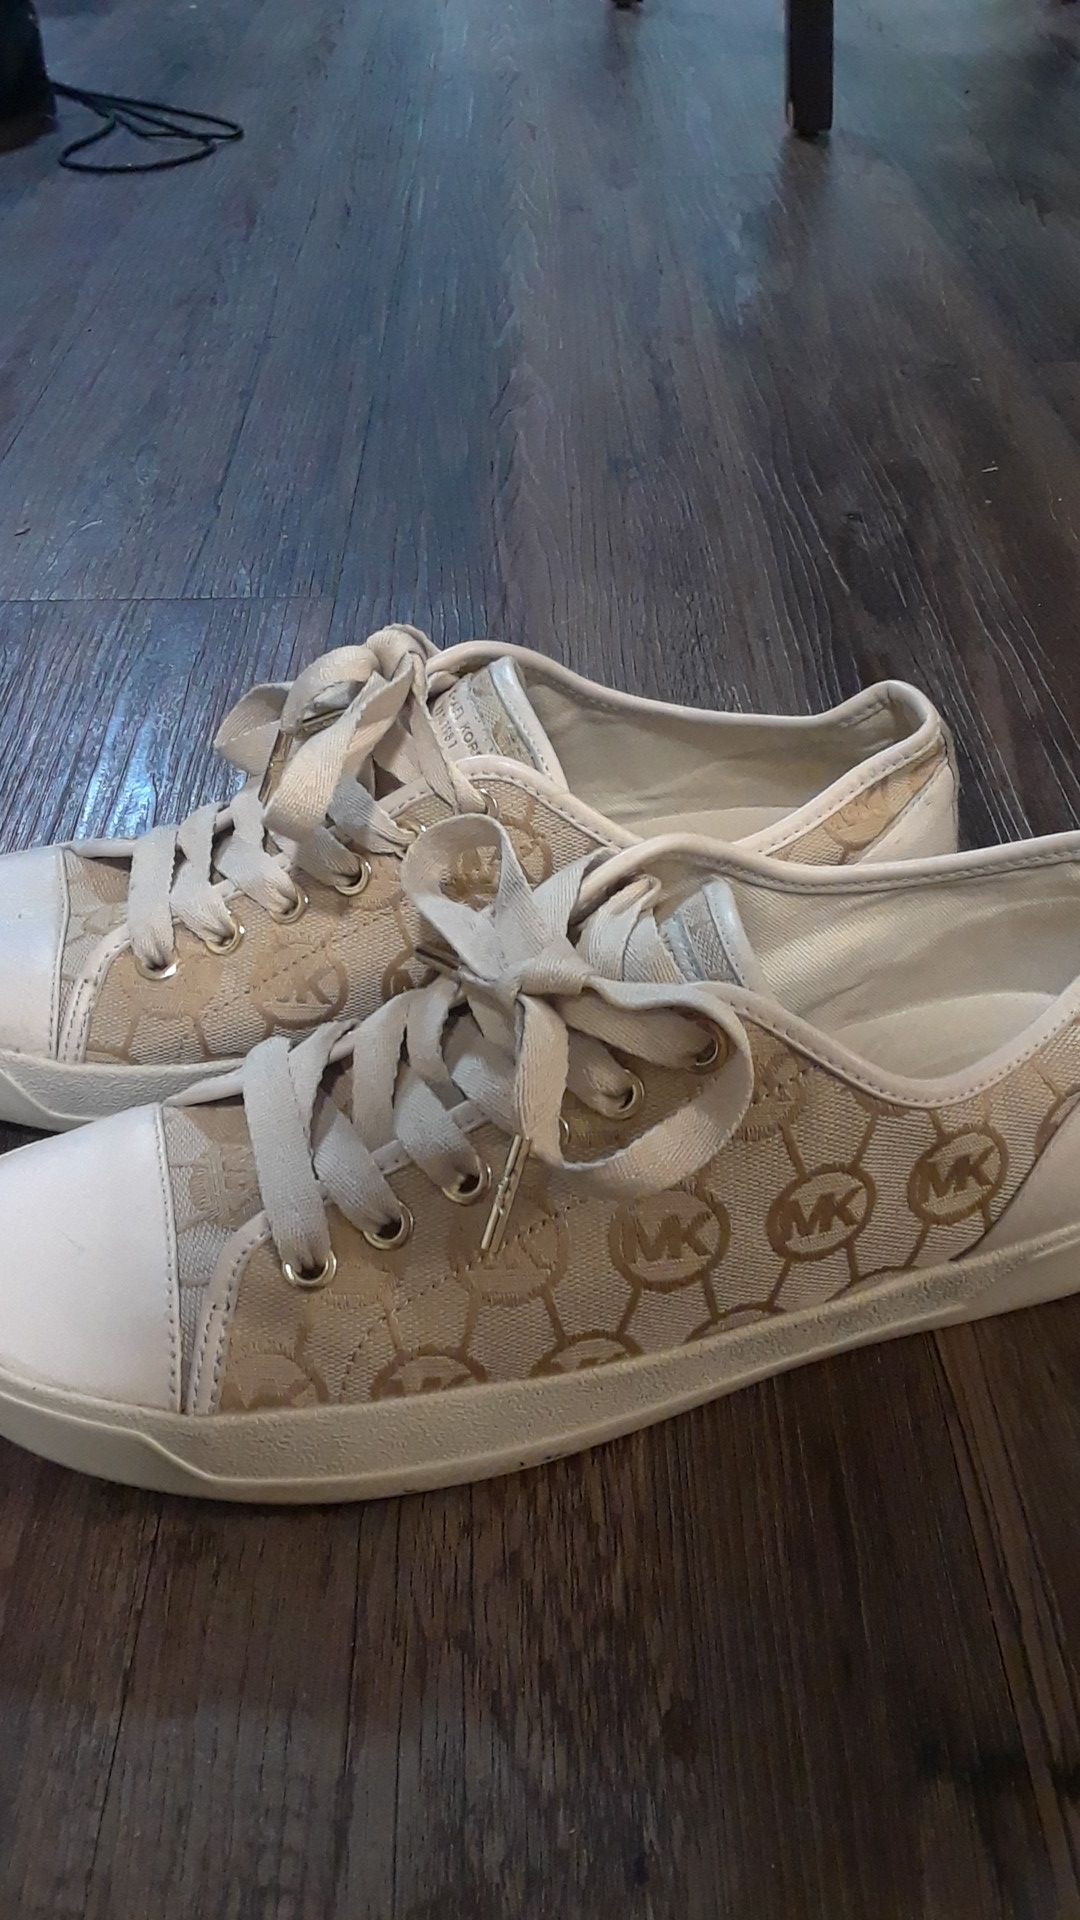 Michael Kors Shell Toes Size 9